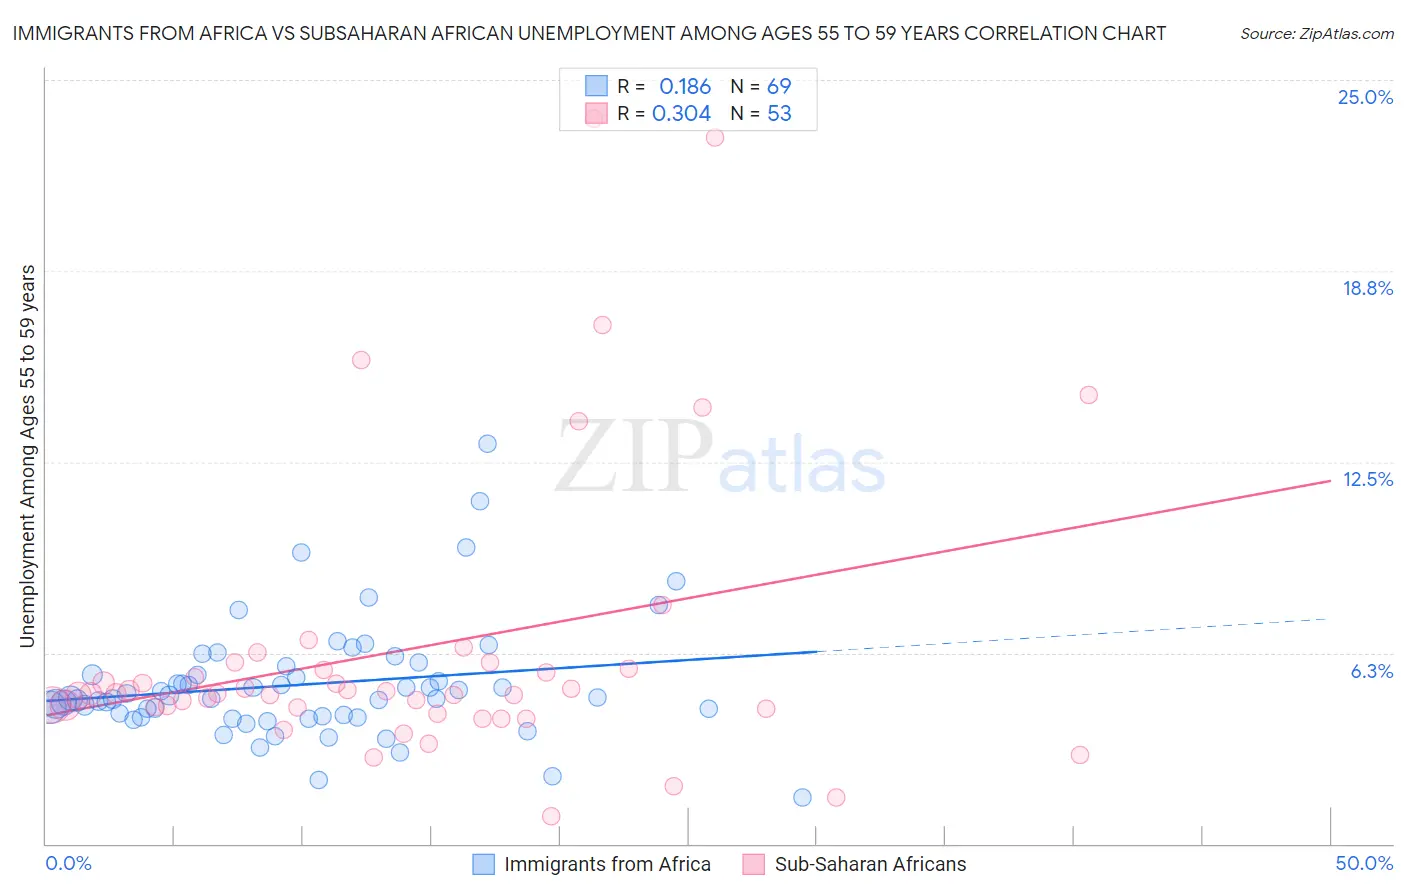 Immigrants from Africa vs Subsaharan African Unemployment Among Ages 55 to 59 years